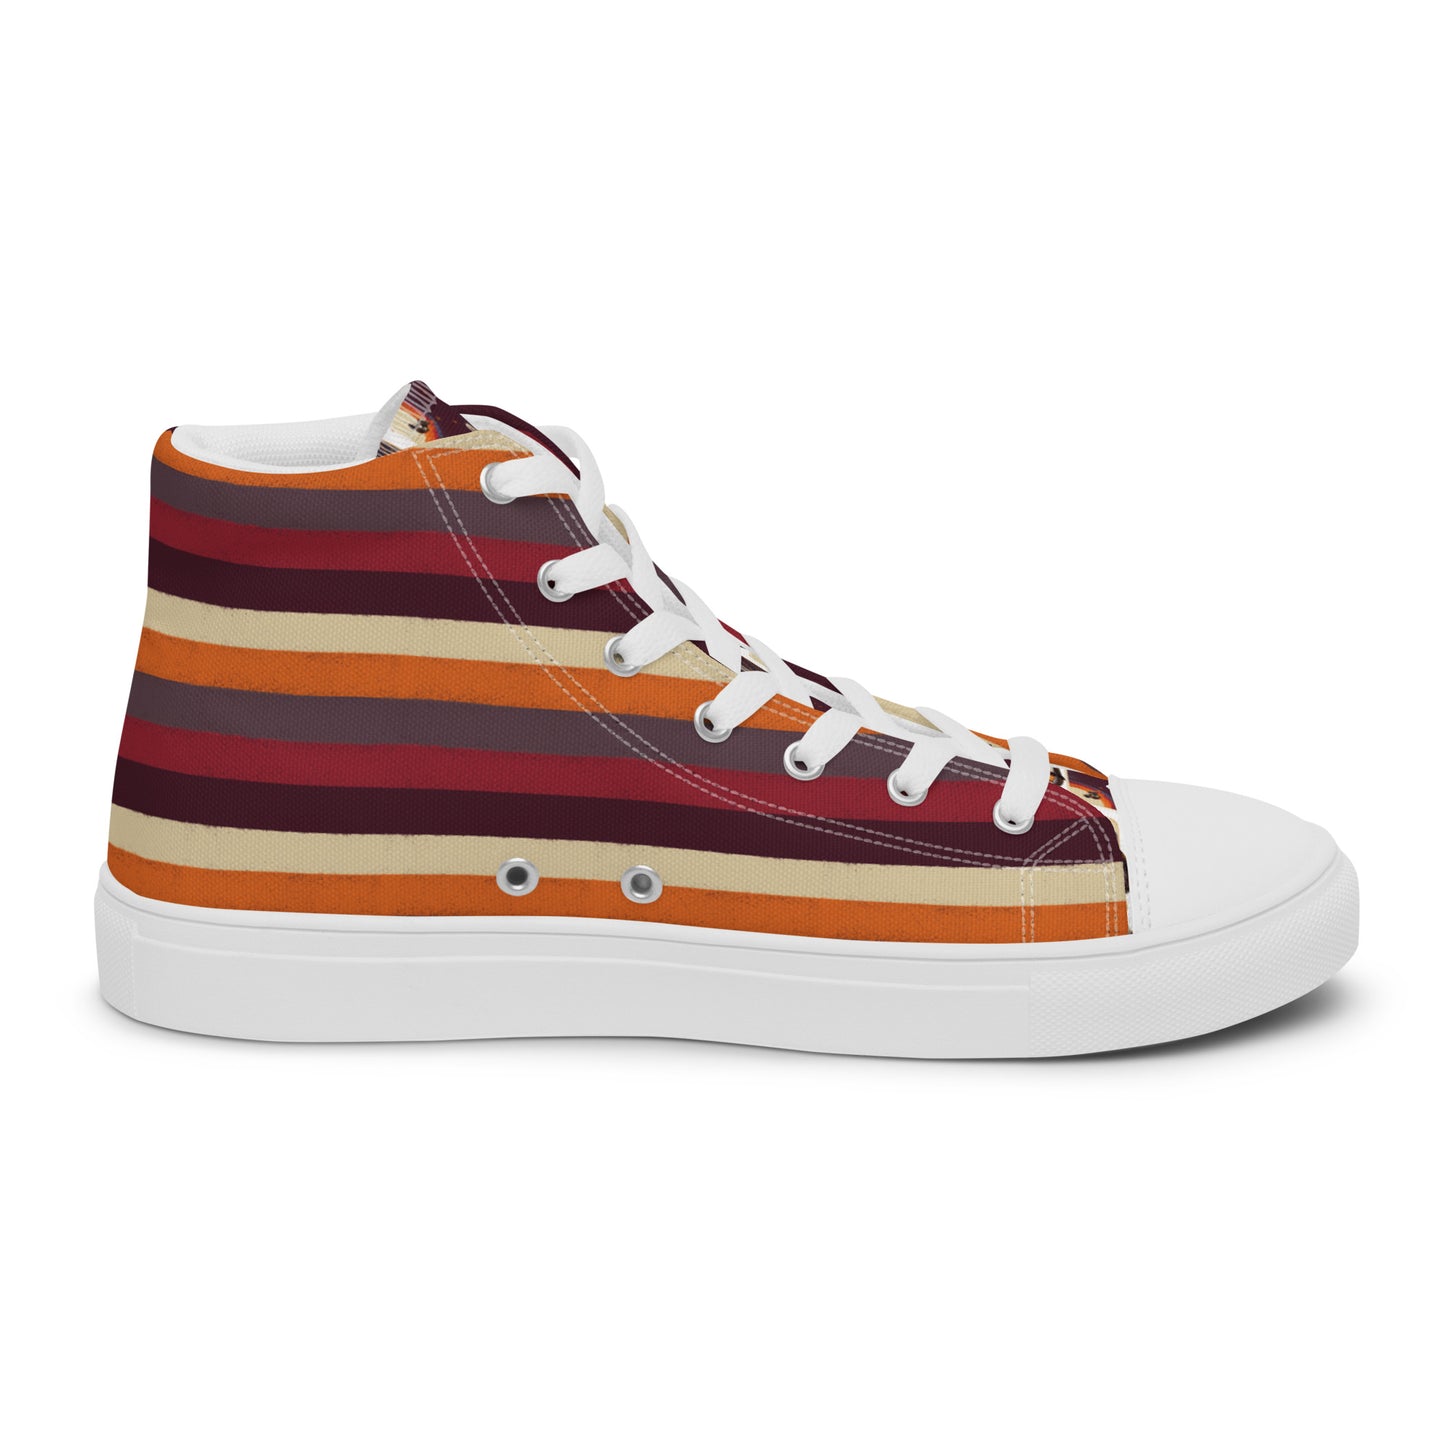  FLUFFY FRONTIER: Men’s high top striped canvas shoes - right view of shoe